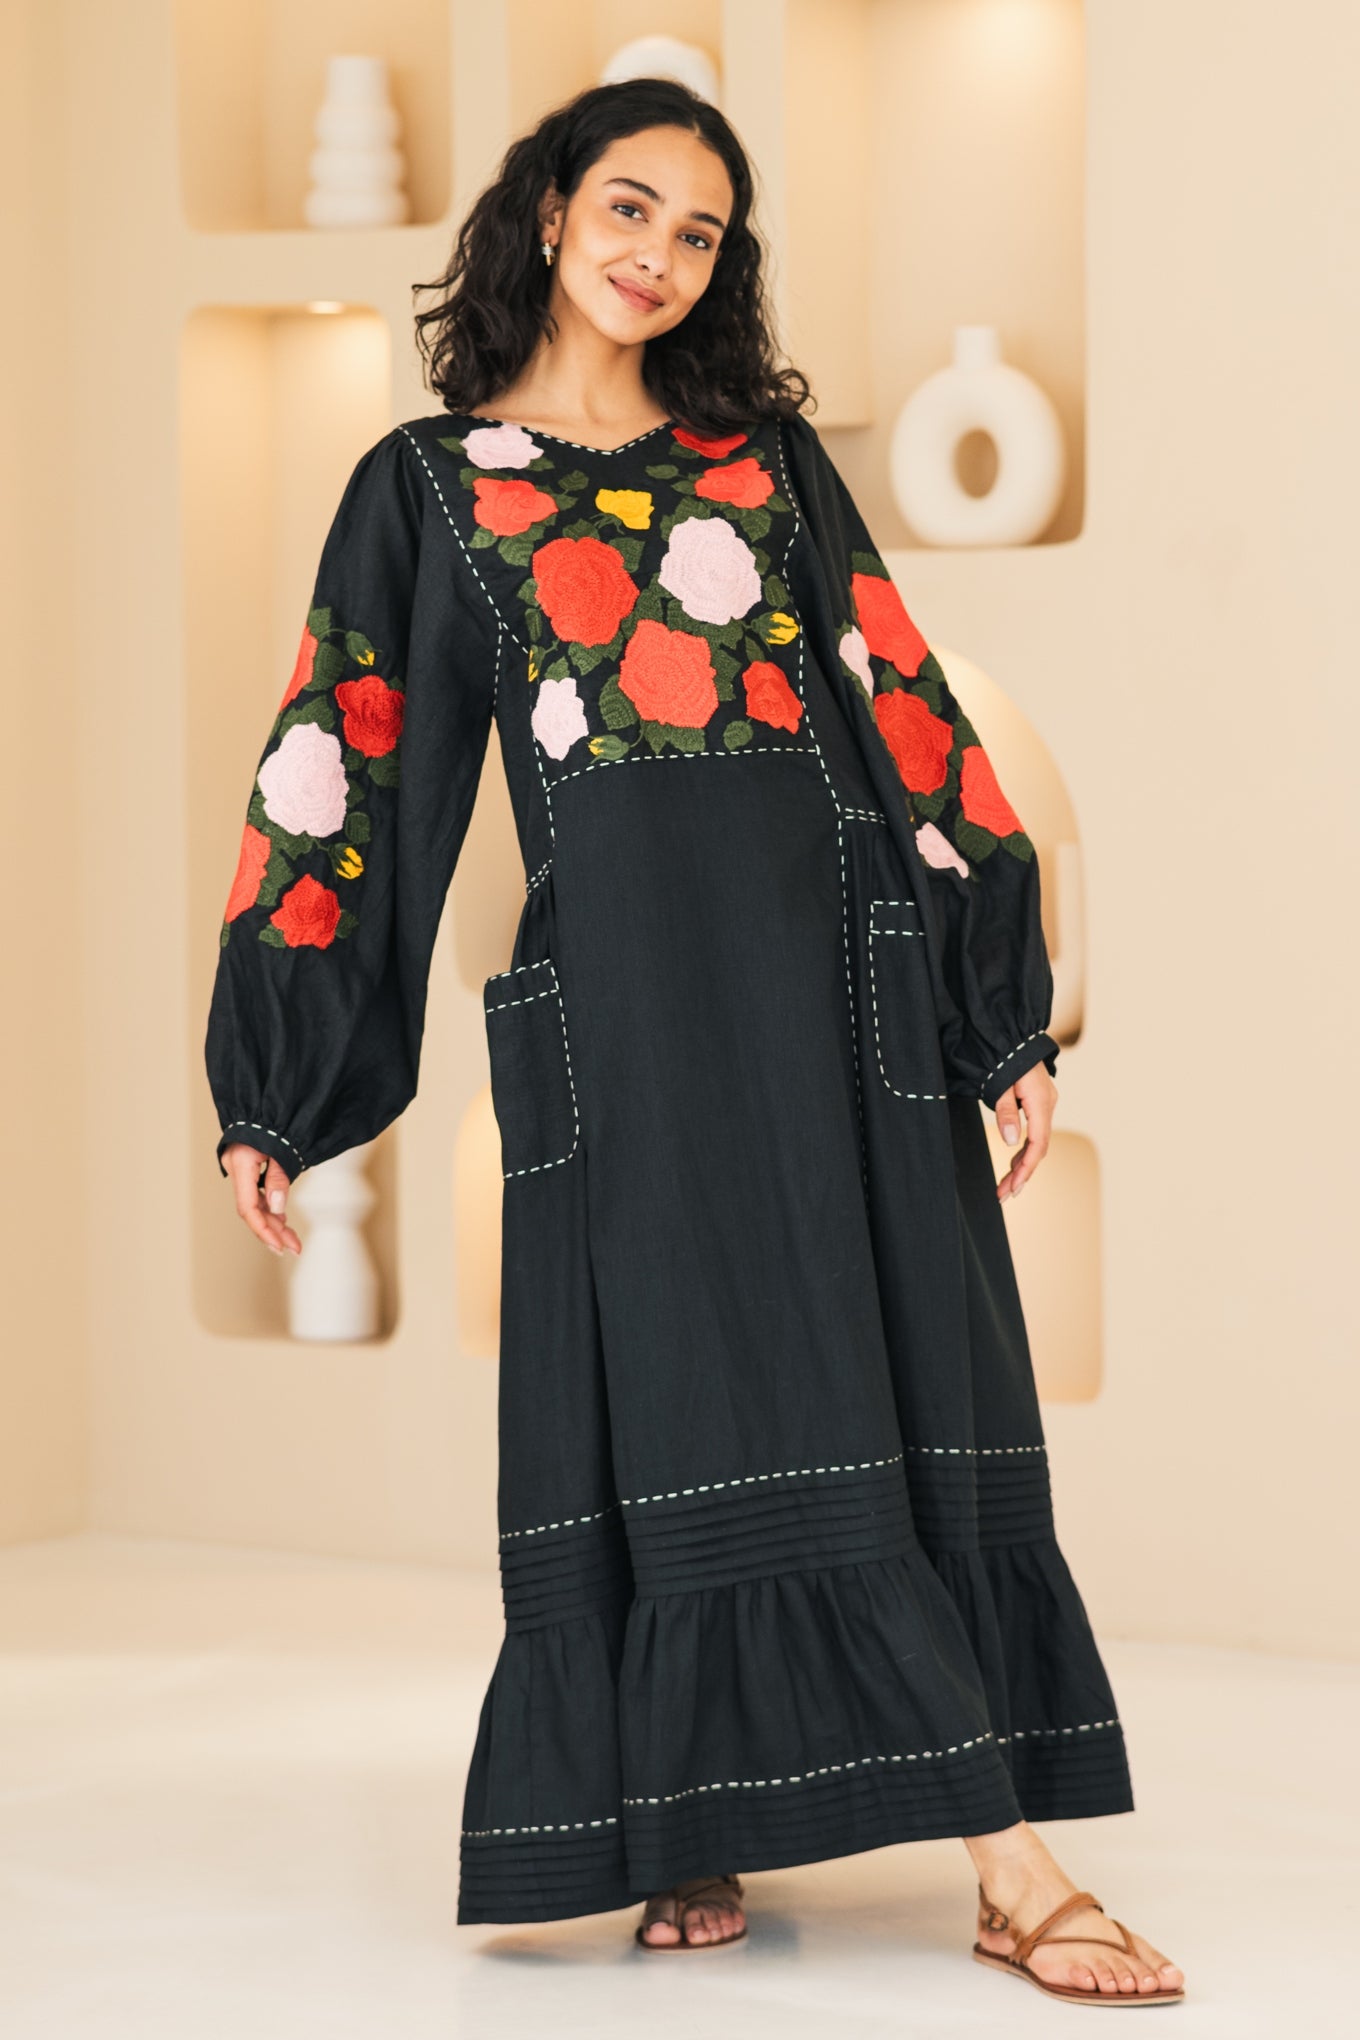 Floral embroidered linen dress Corsica